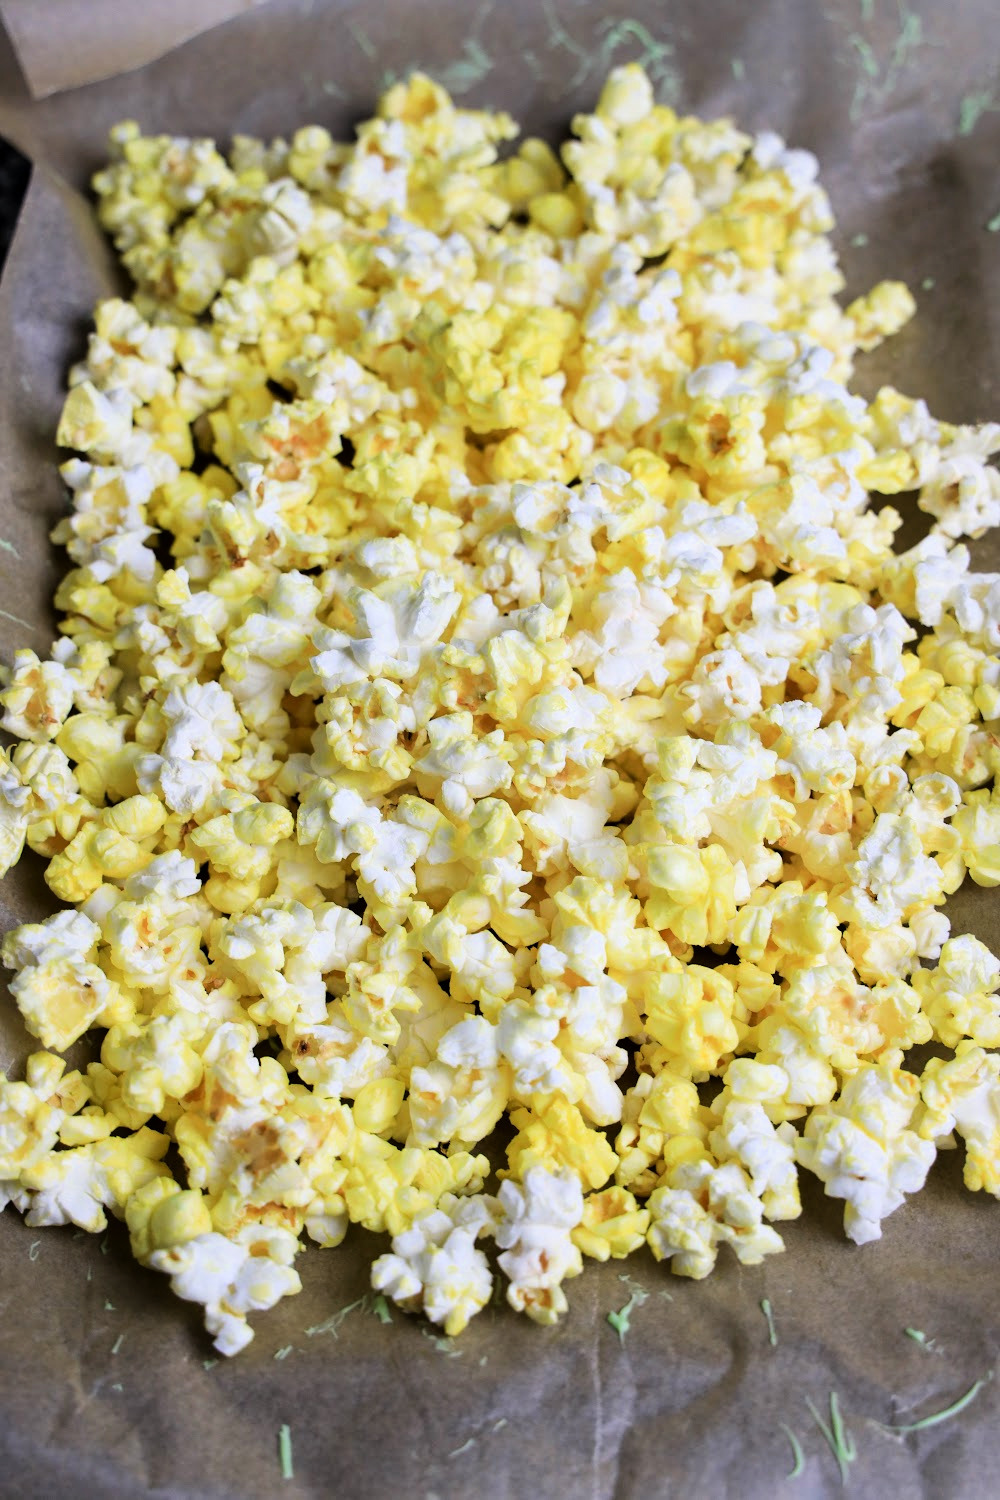 Make some buttered popcorn and remove all the unpopped kernels. Then, place the popped ones on a baking sheet that is covered with parchment paper.